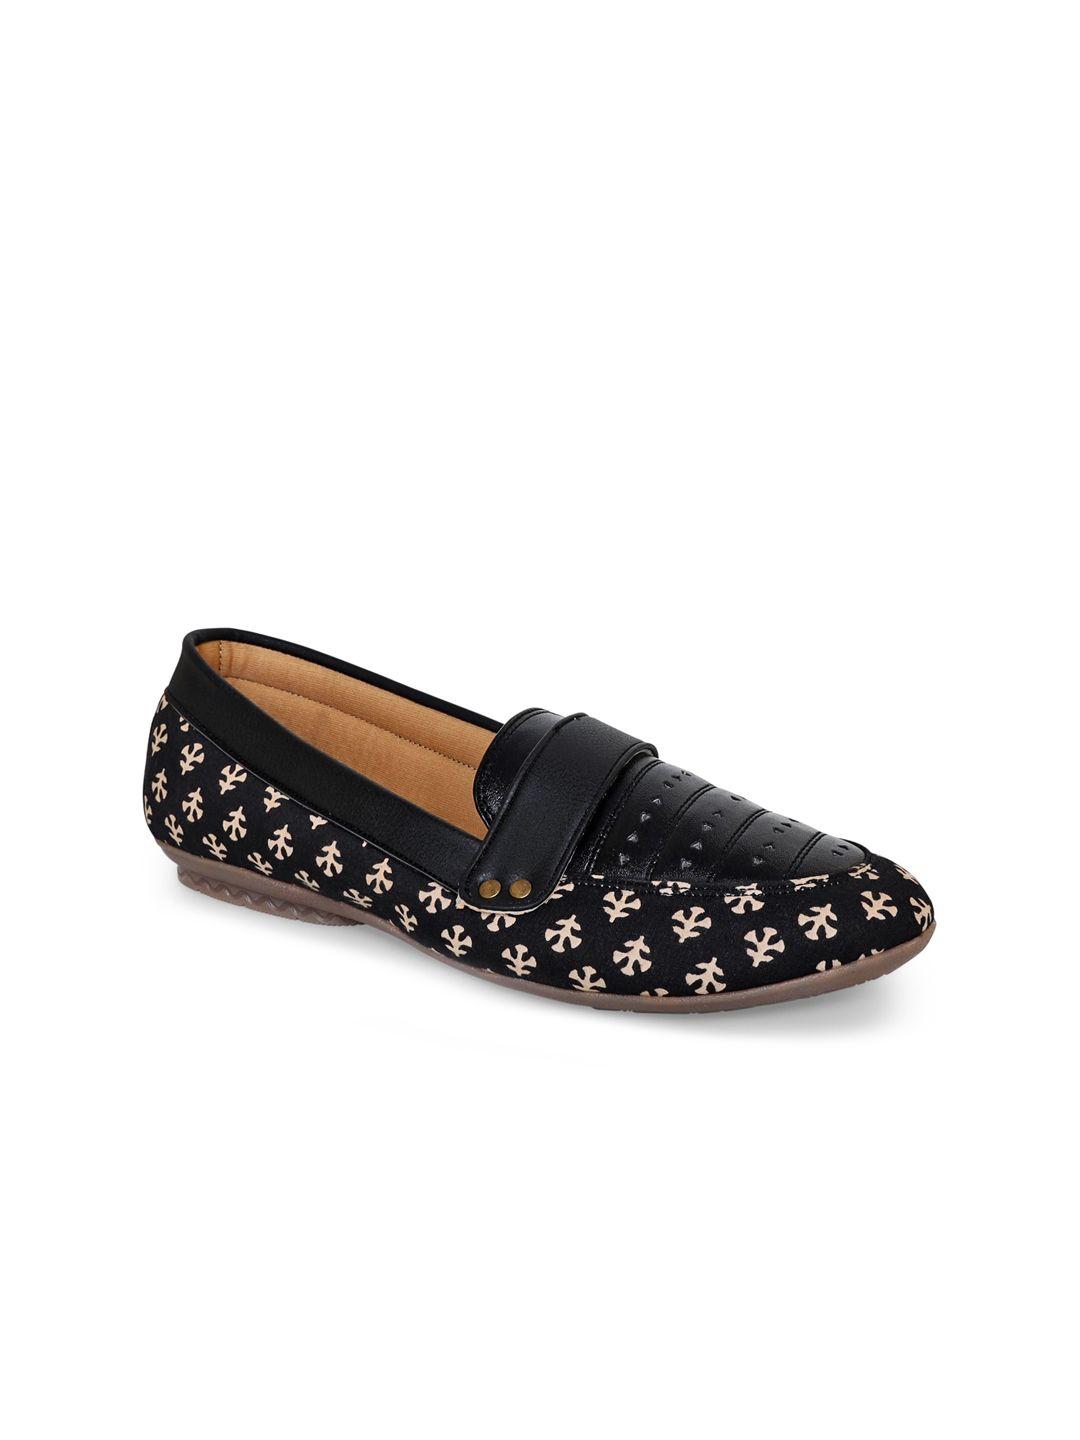 kanvas-women-printed-comfort-insole-textile-loafers